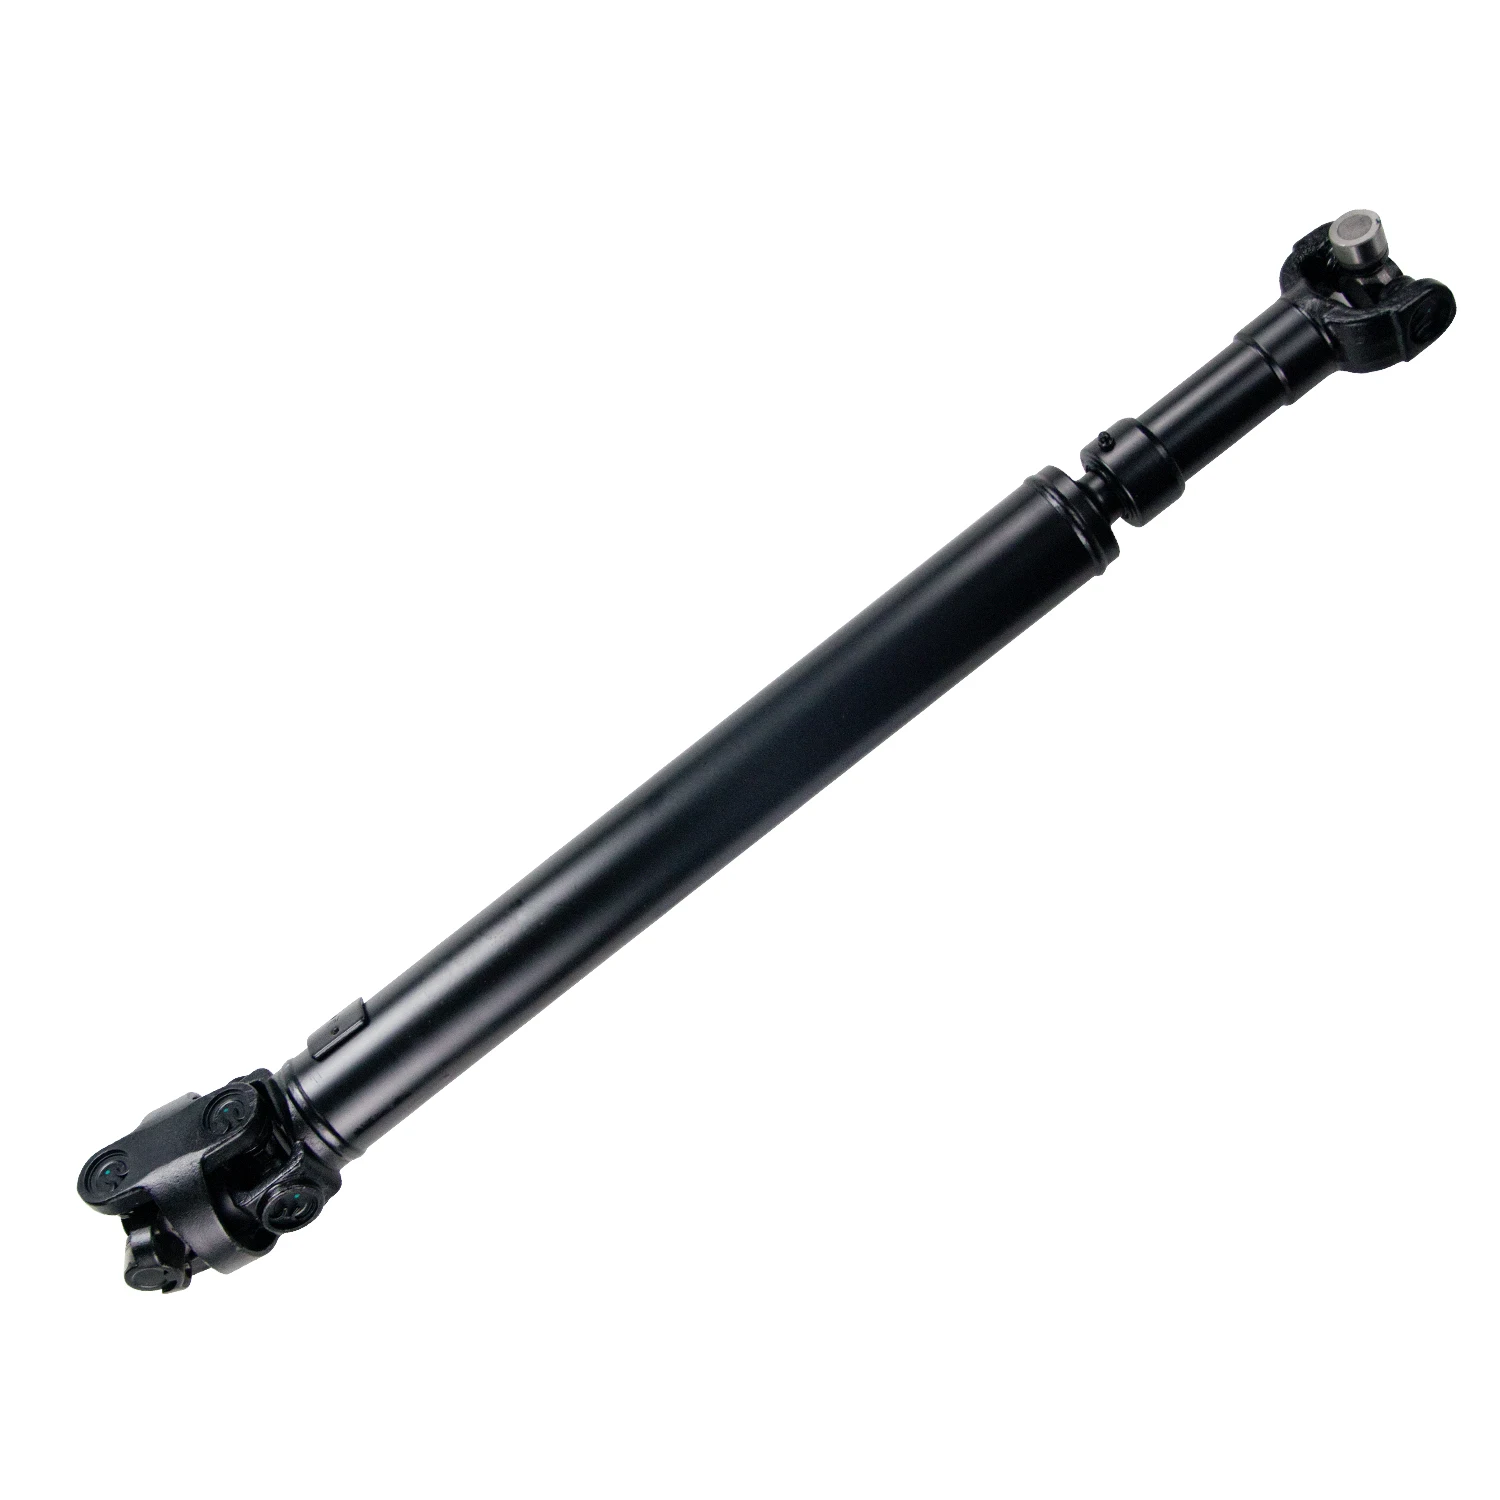 For Jeep Wrangler TJ parts New Front Propeller Shaft Drive Shaft 65-9316 driveshaft with high quality KOWA brand